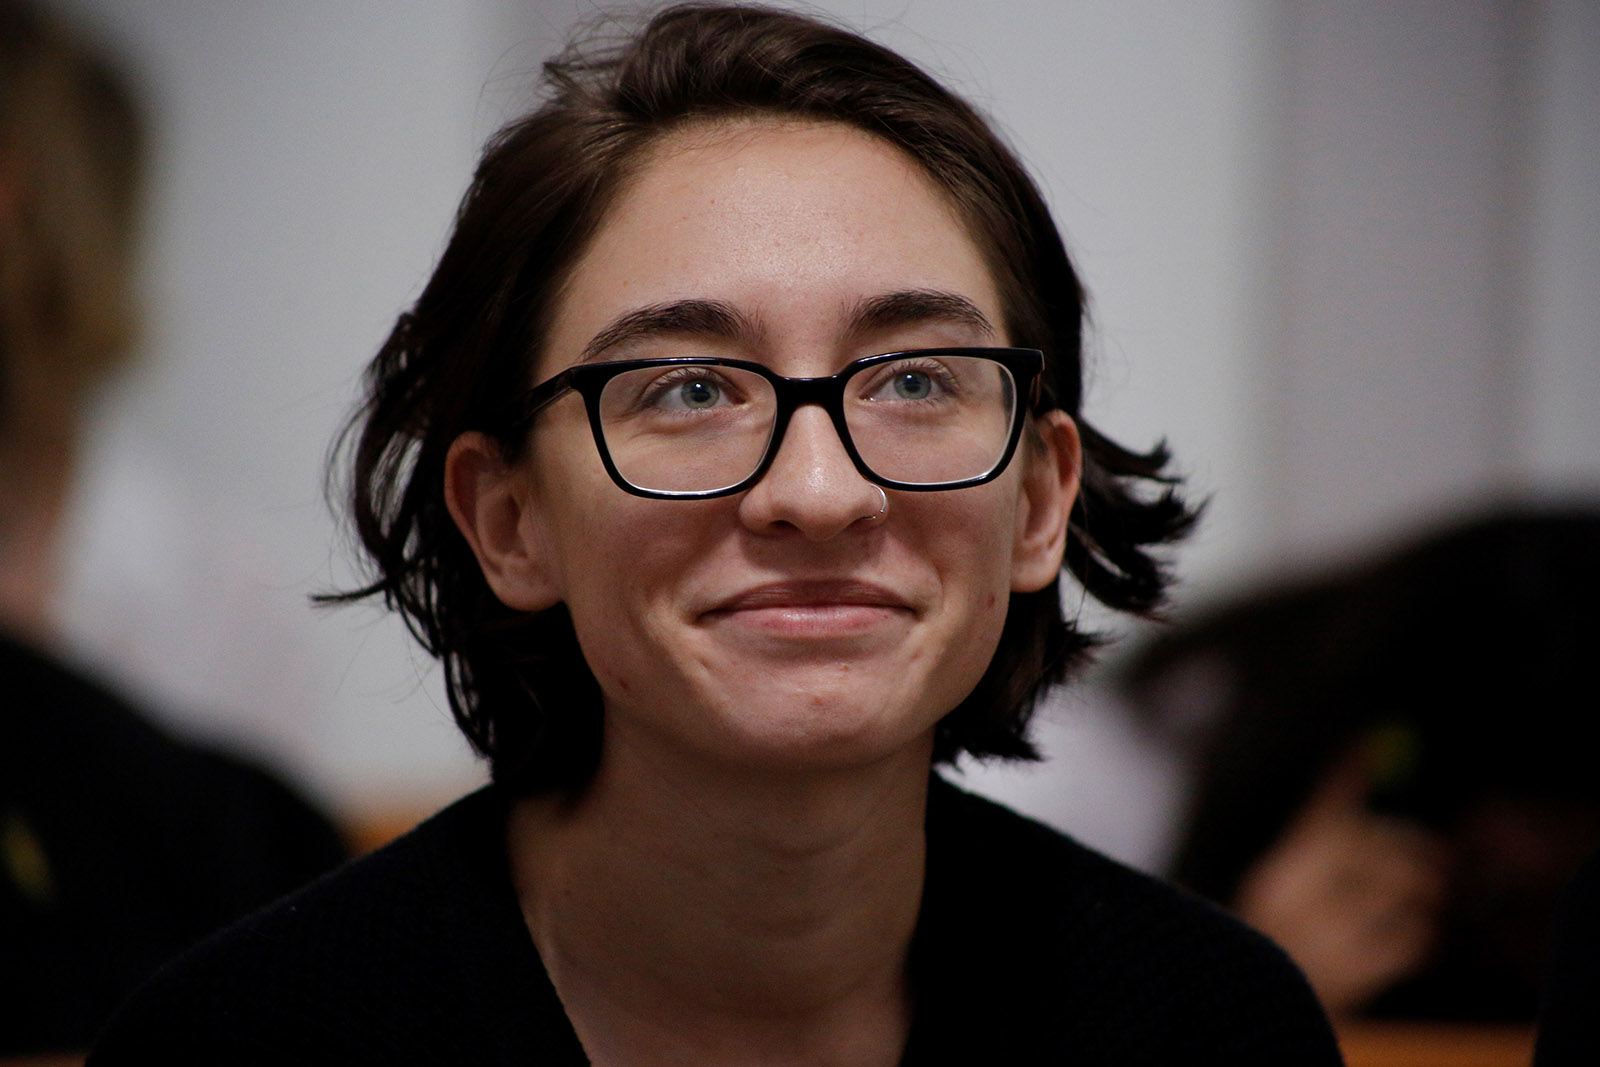 US student Lara Alqasem at a court hearing in Tel Aviv after her detention on arrival in Israel by the authorities on the grounds that she supported the Boycott, Divestment and Sanctions (BDS) movement, October 17, 2018